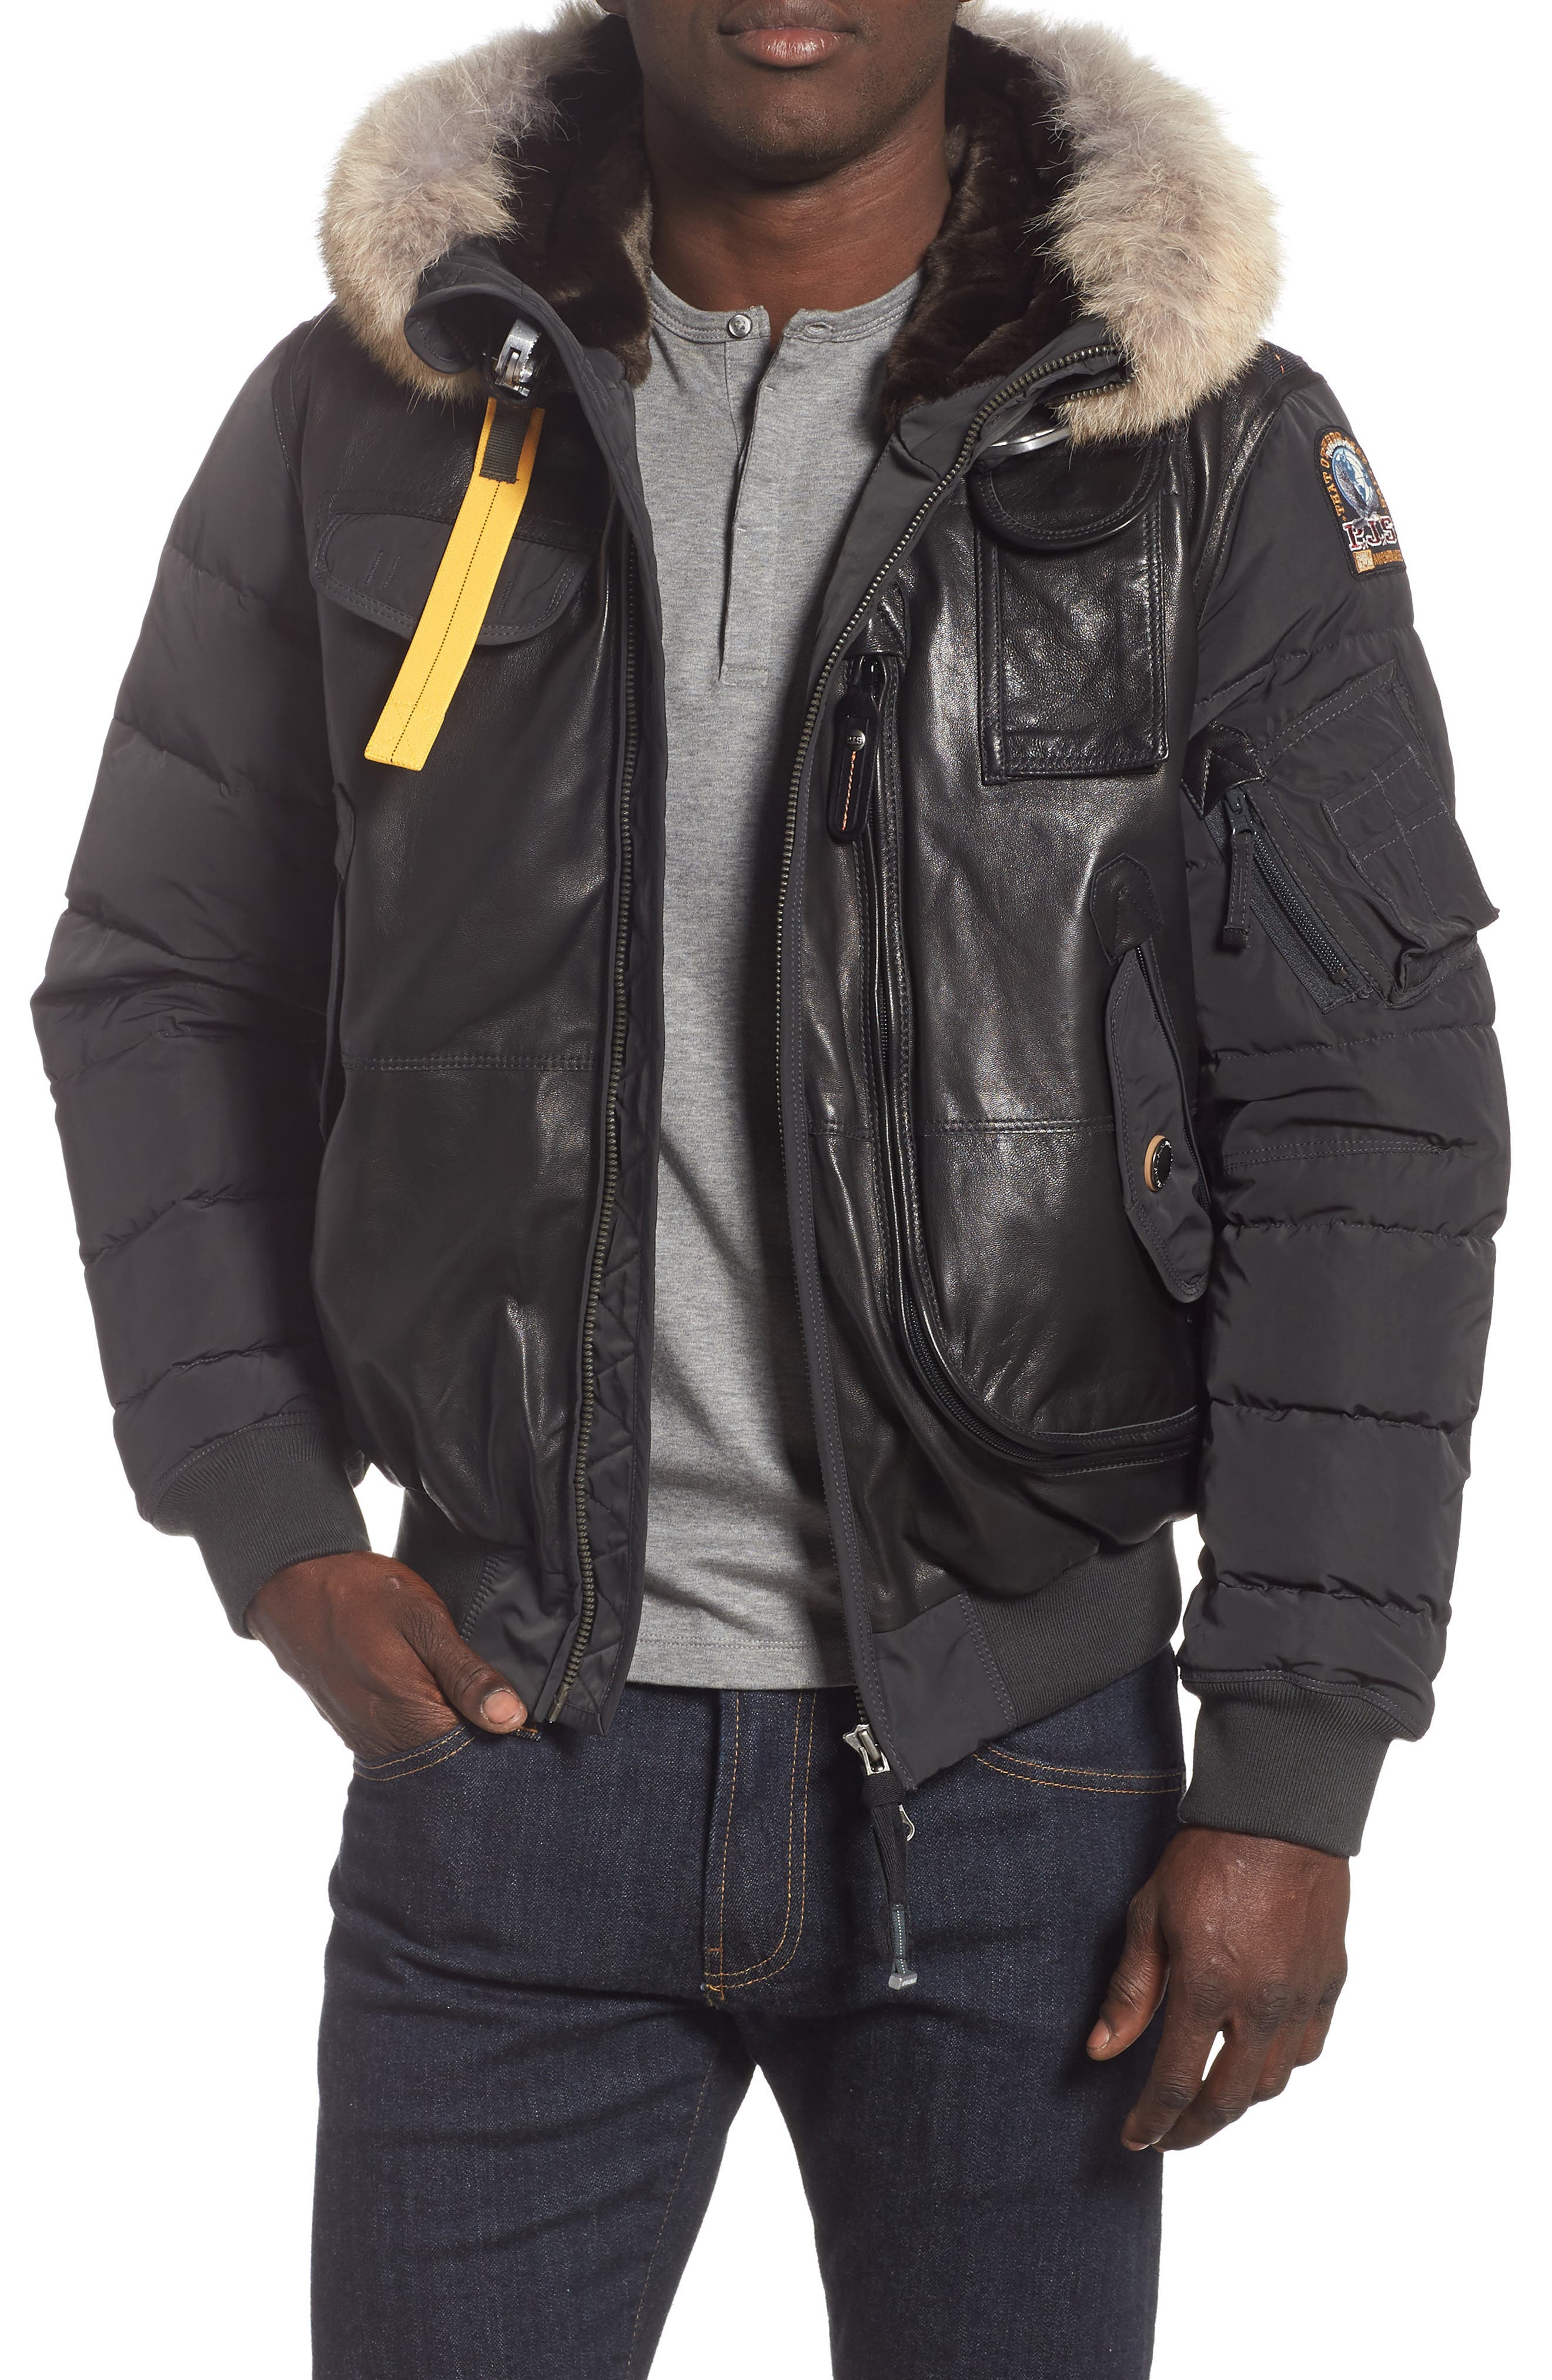 parajumper grizzly jacket